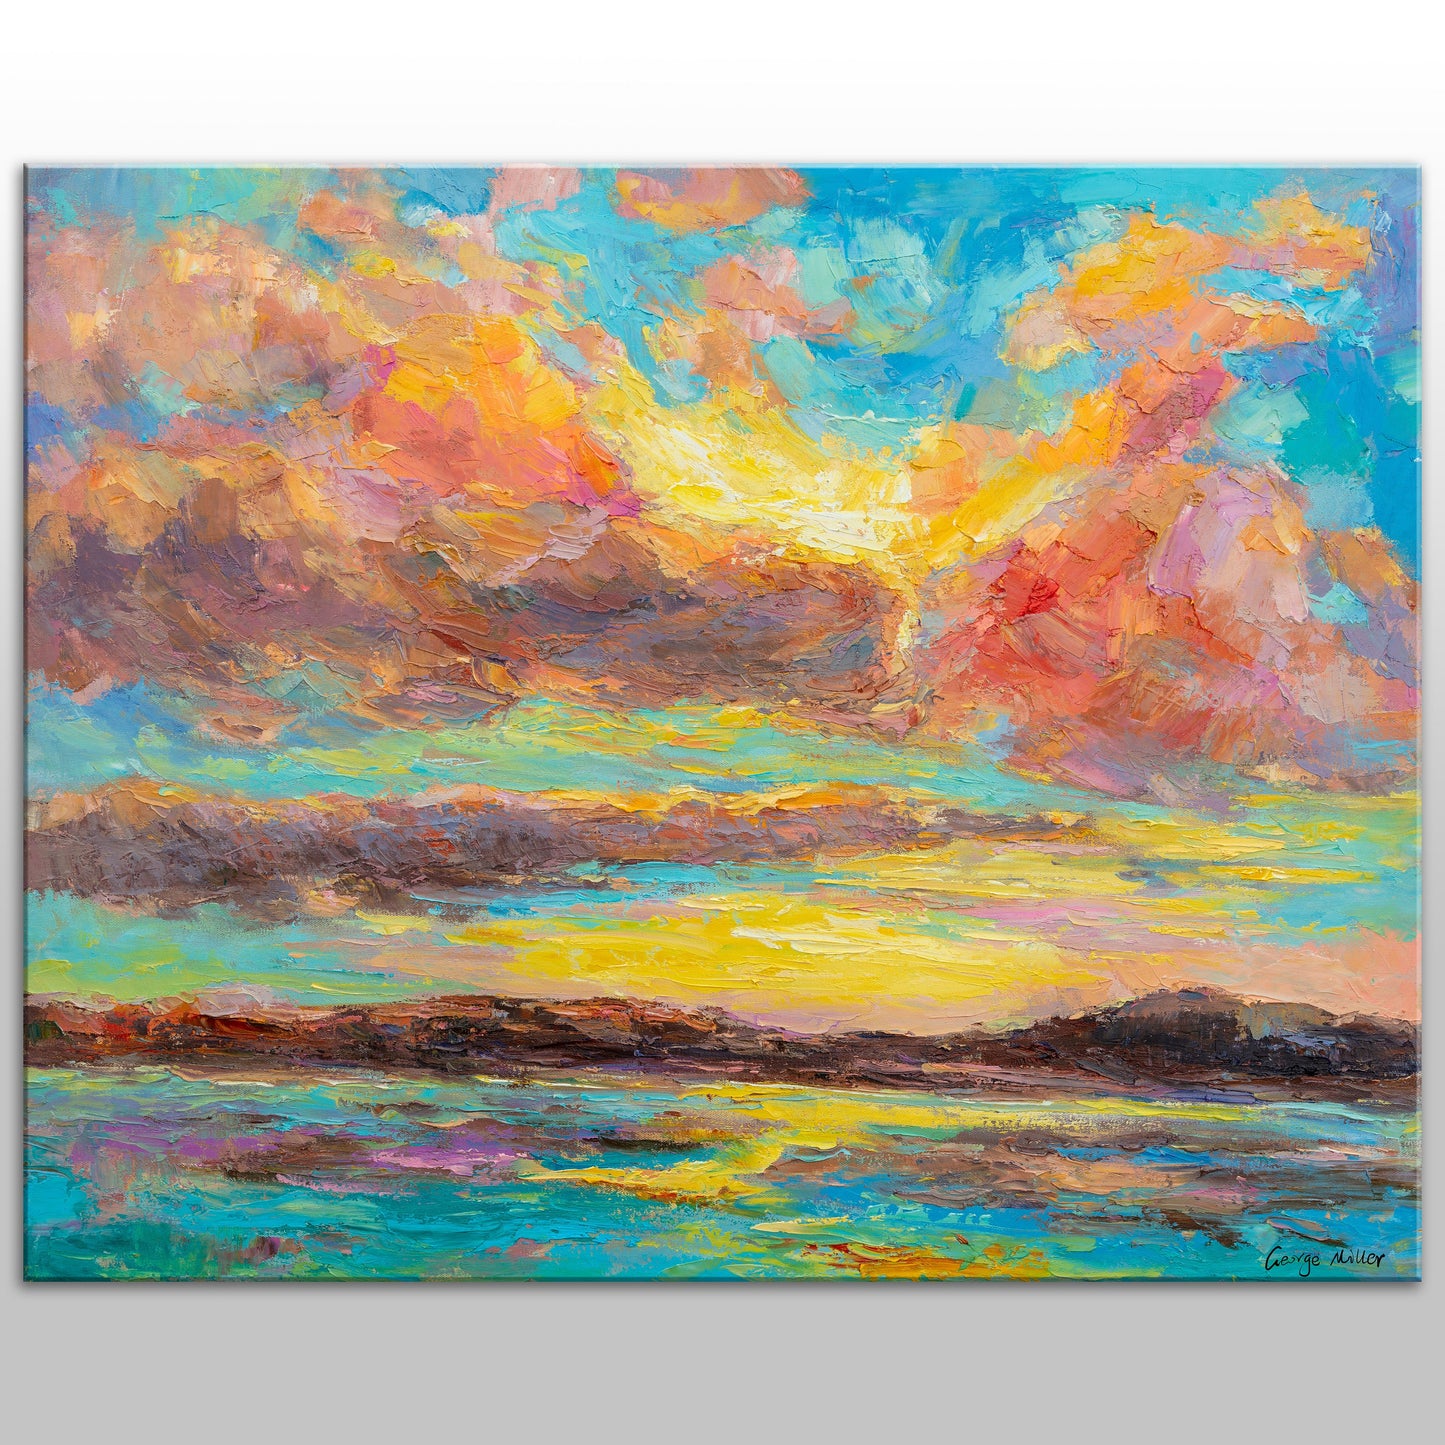 Abstract Art, Abstract Painting, Large Art, Seascape, Skyscape at Dawn, Large Abstract Painting, Landscape Oil Painting, Painting On Canvas